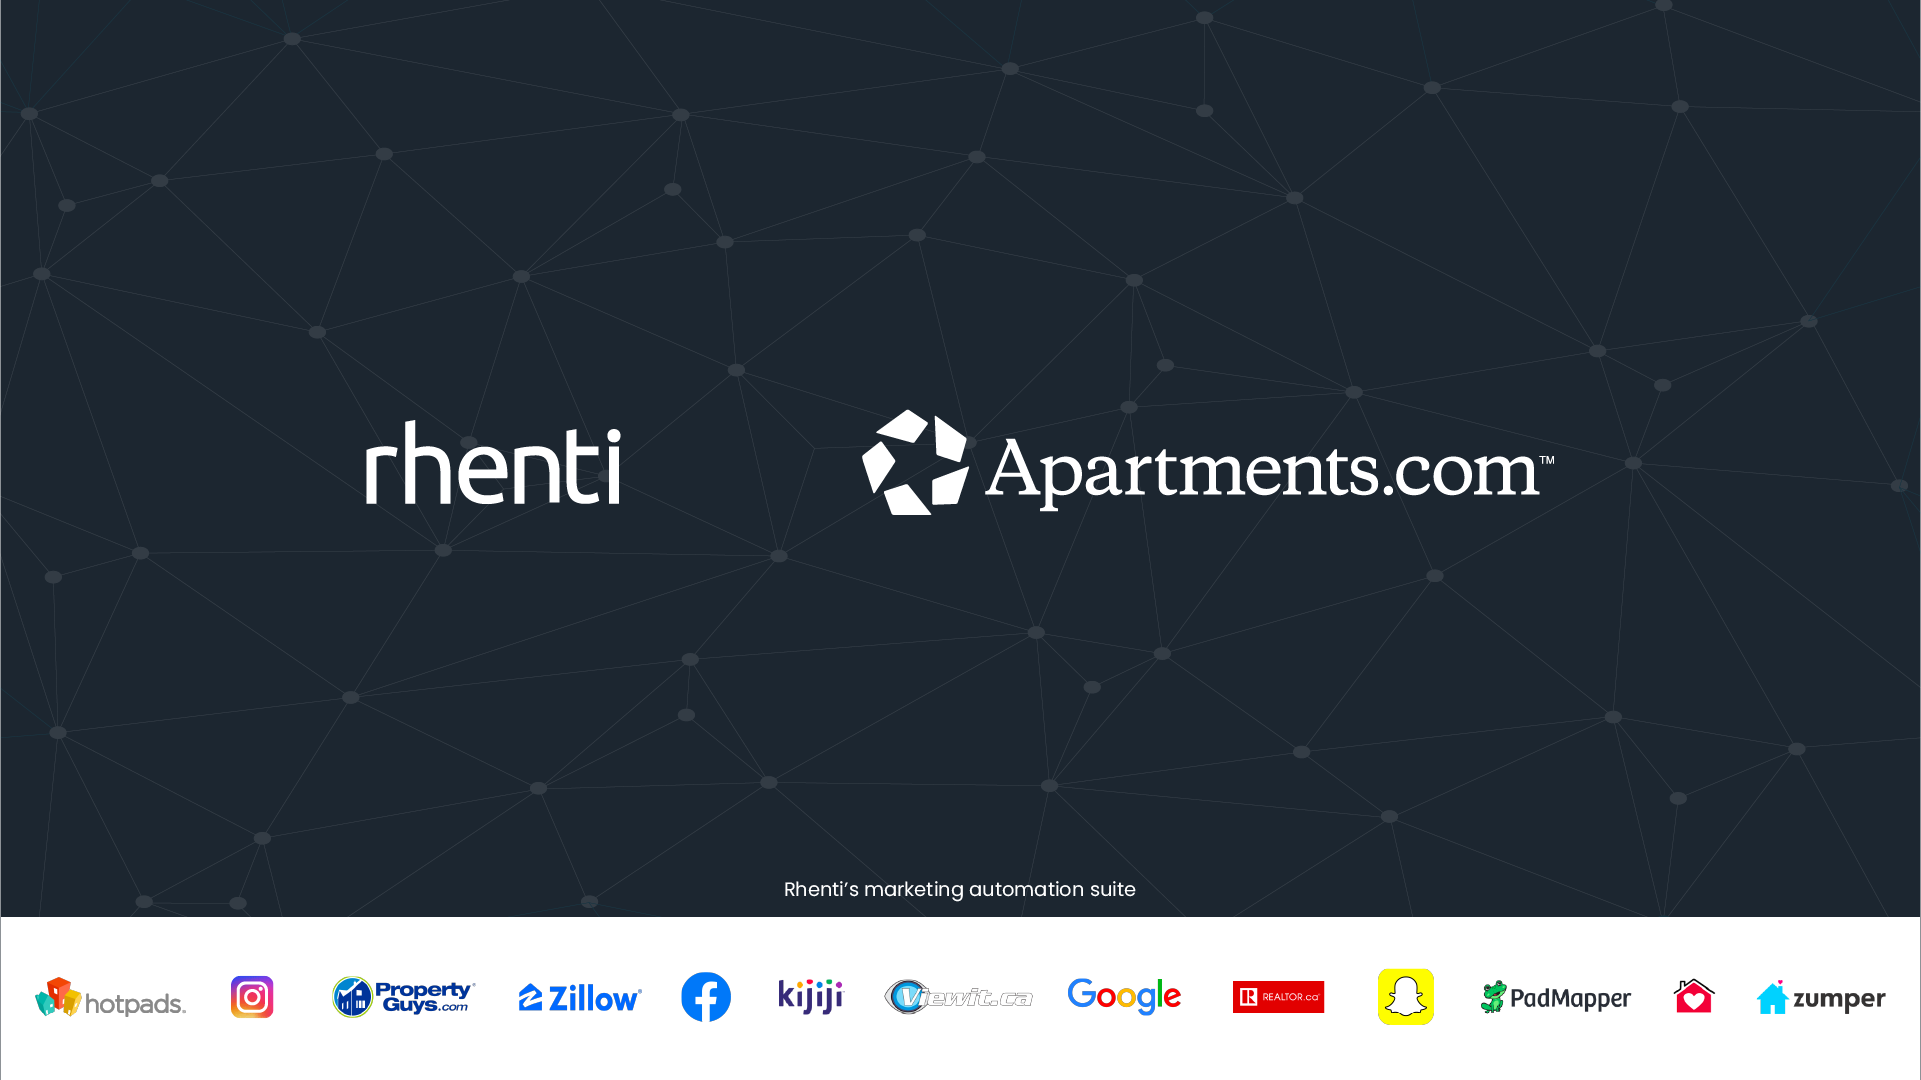 Rhenti partners with Apartments.com, adding channel to its marketing automation suite.